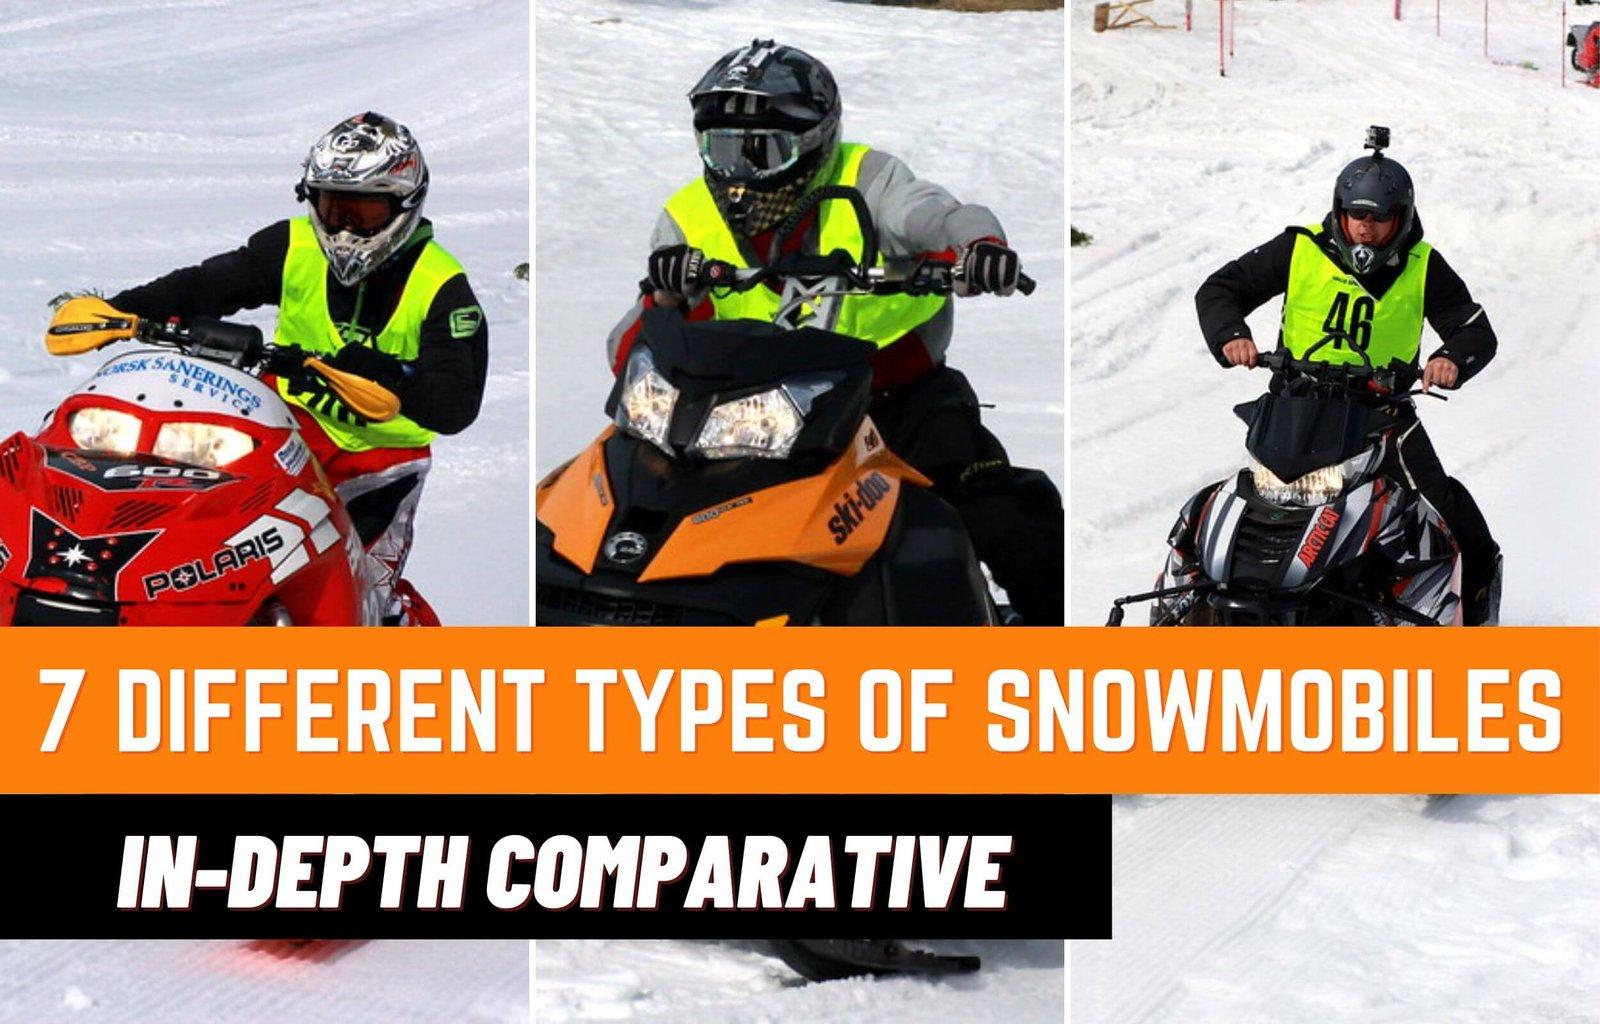 7 Different Types of Snowmobiles